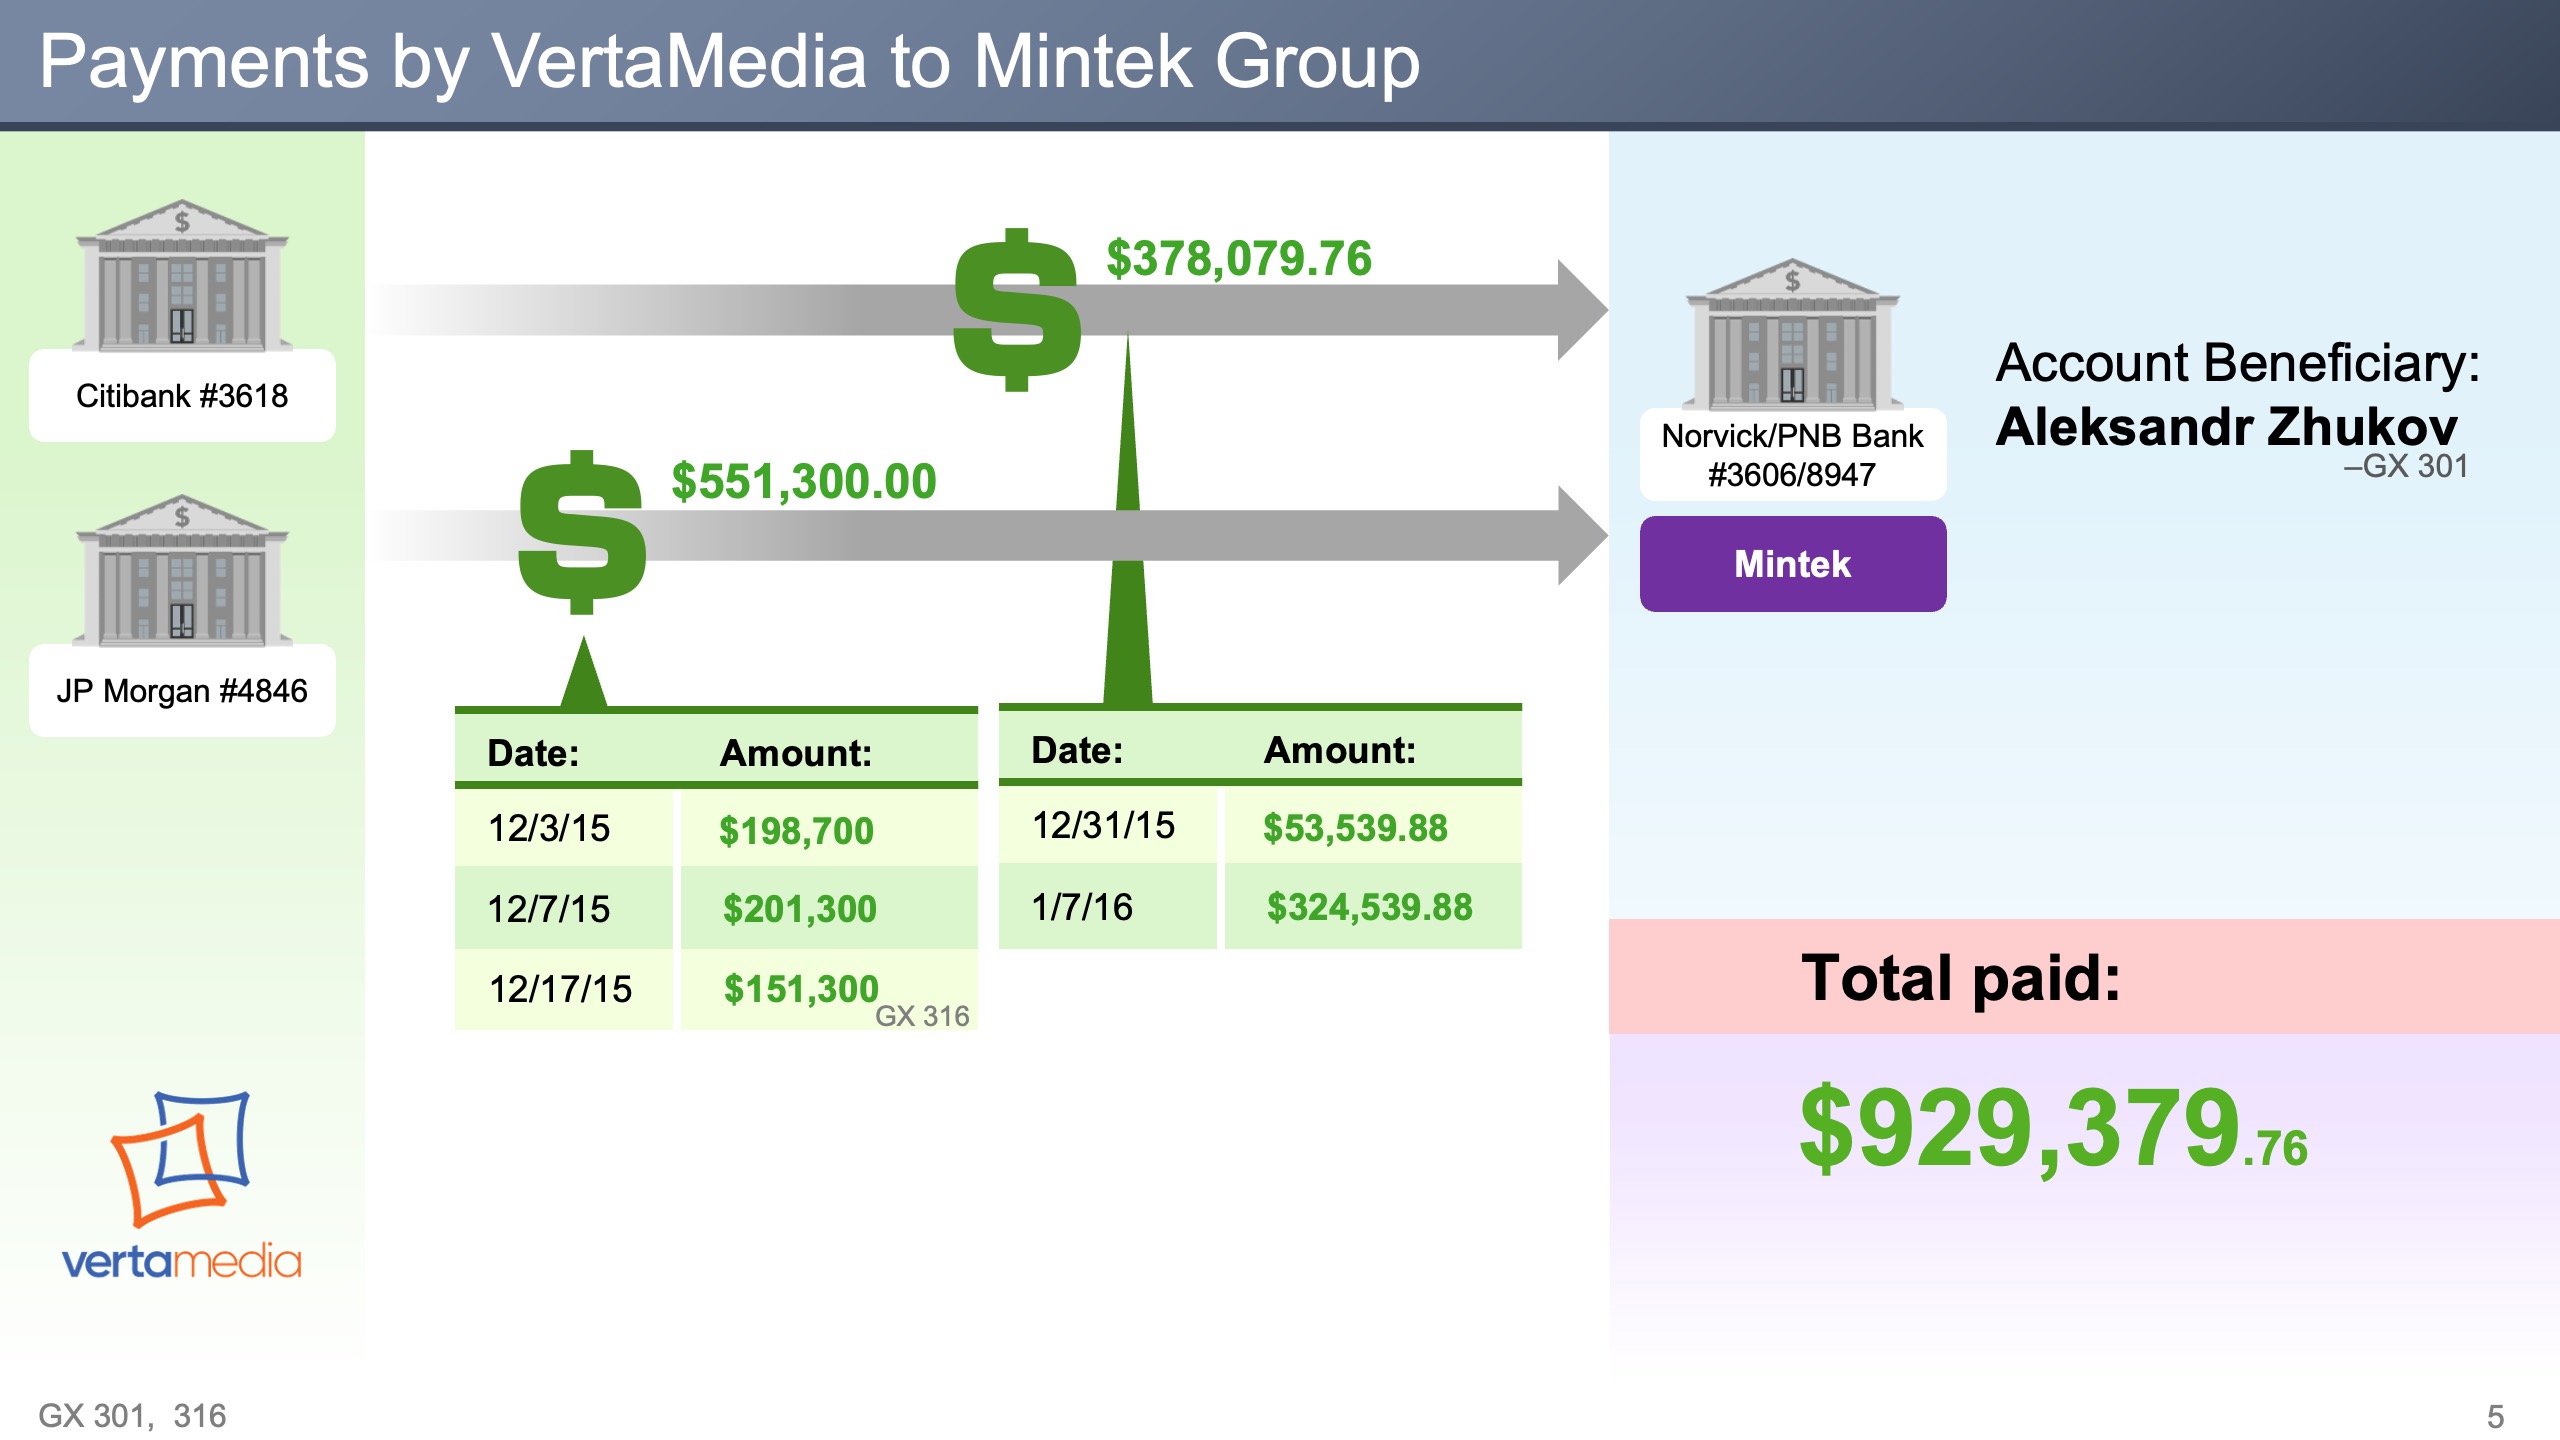 The poster of Payment by Verta Media to Mintek Group detailing amounts paid and total paid.